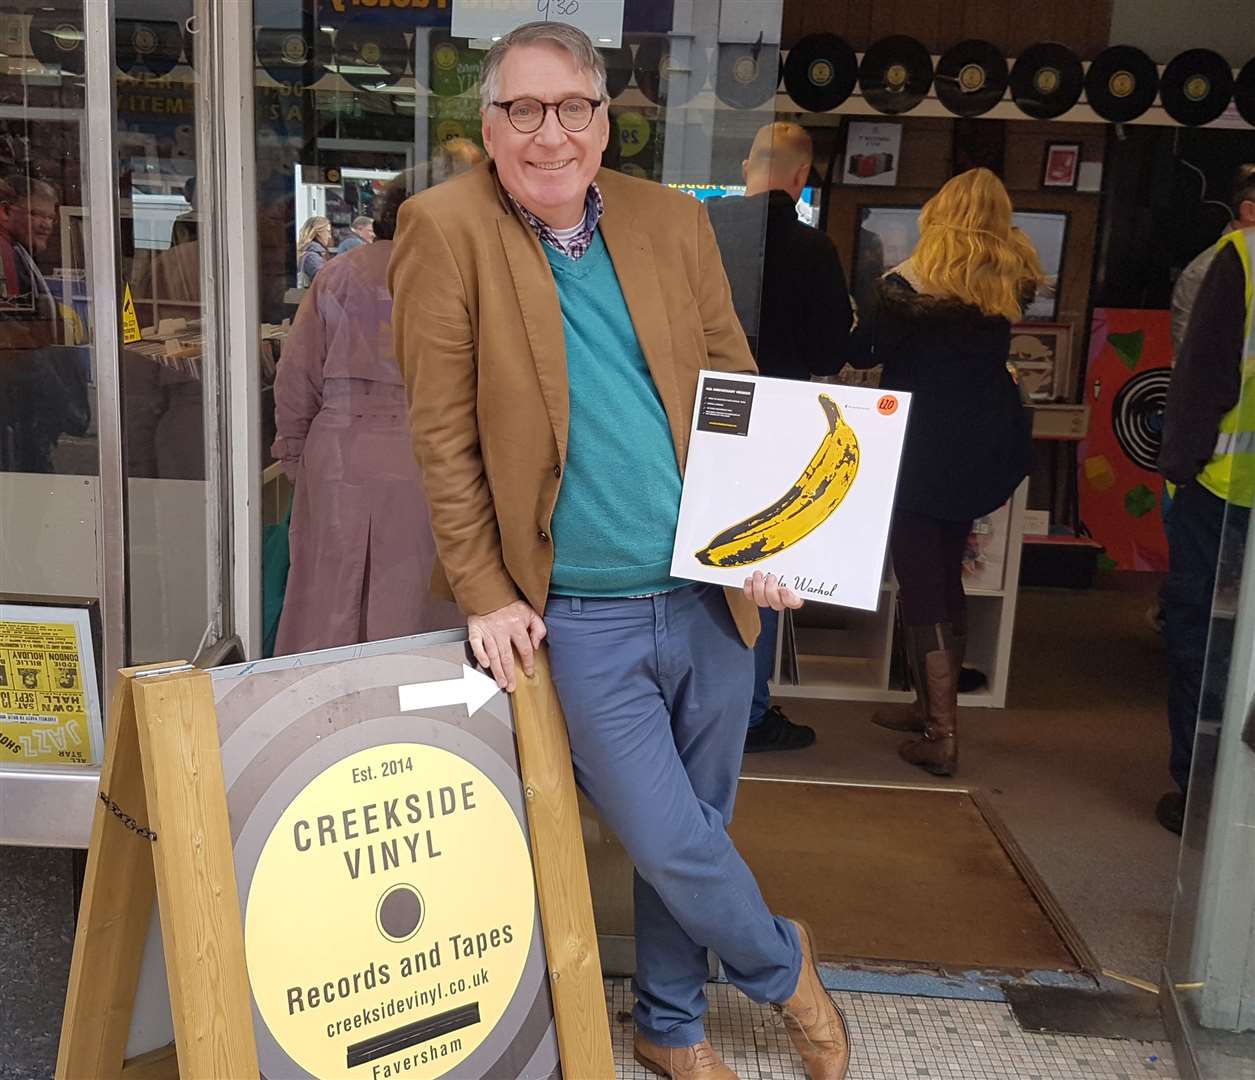 Simon Tyler, who runs Creekside Vinyl, is looking forward to welcoming back customers when safe to do so.